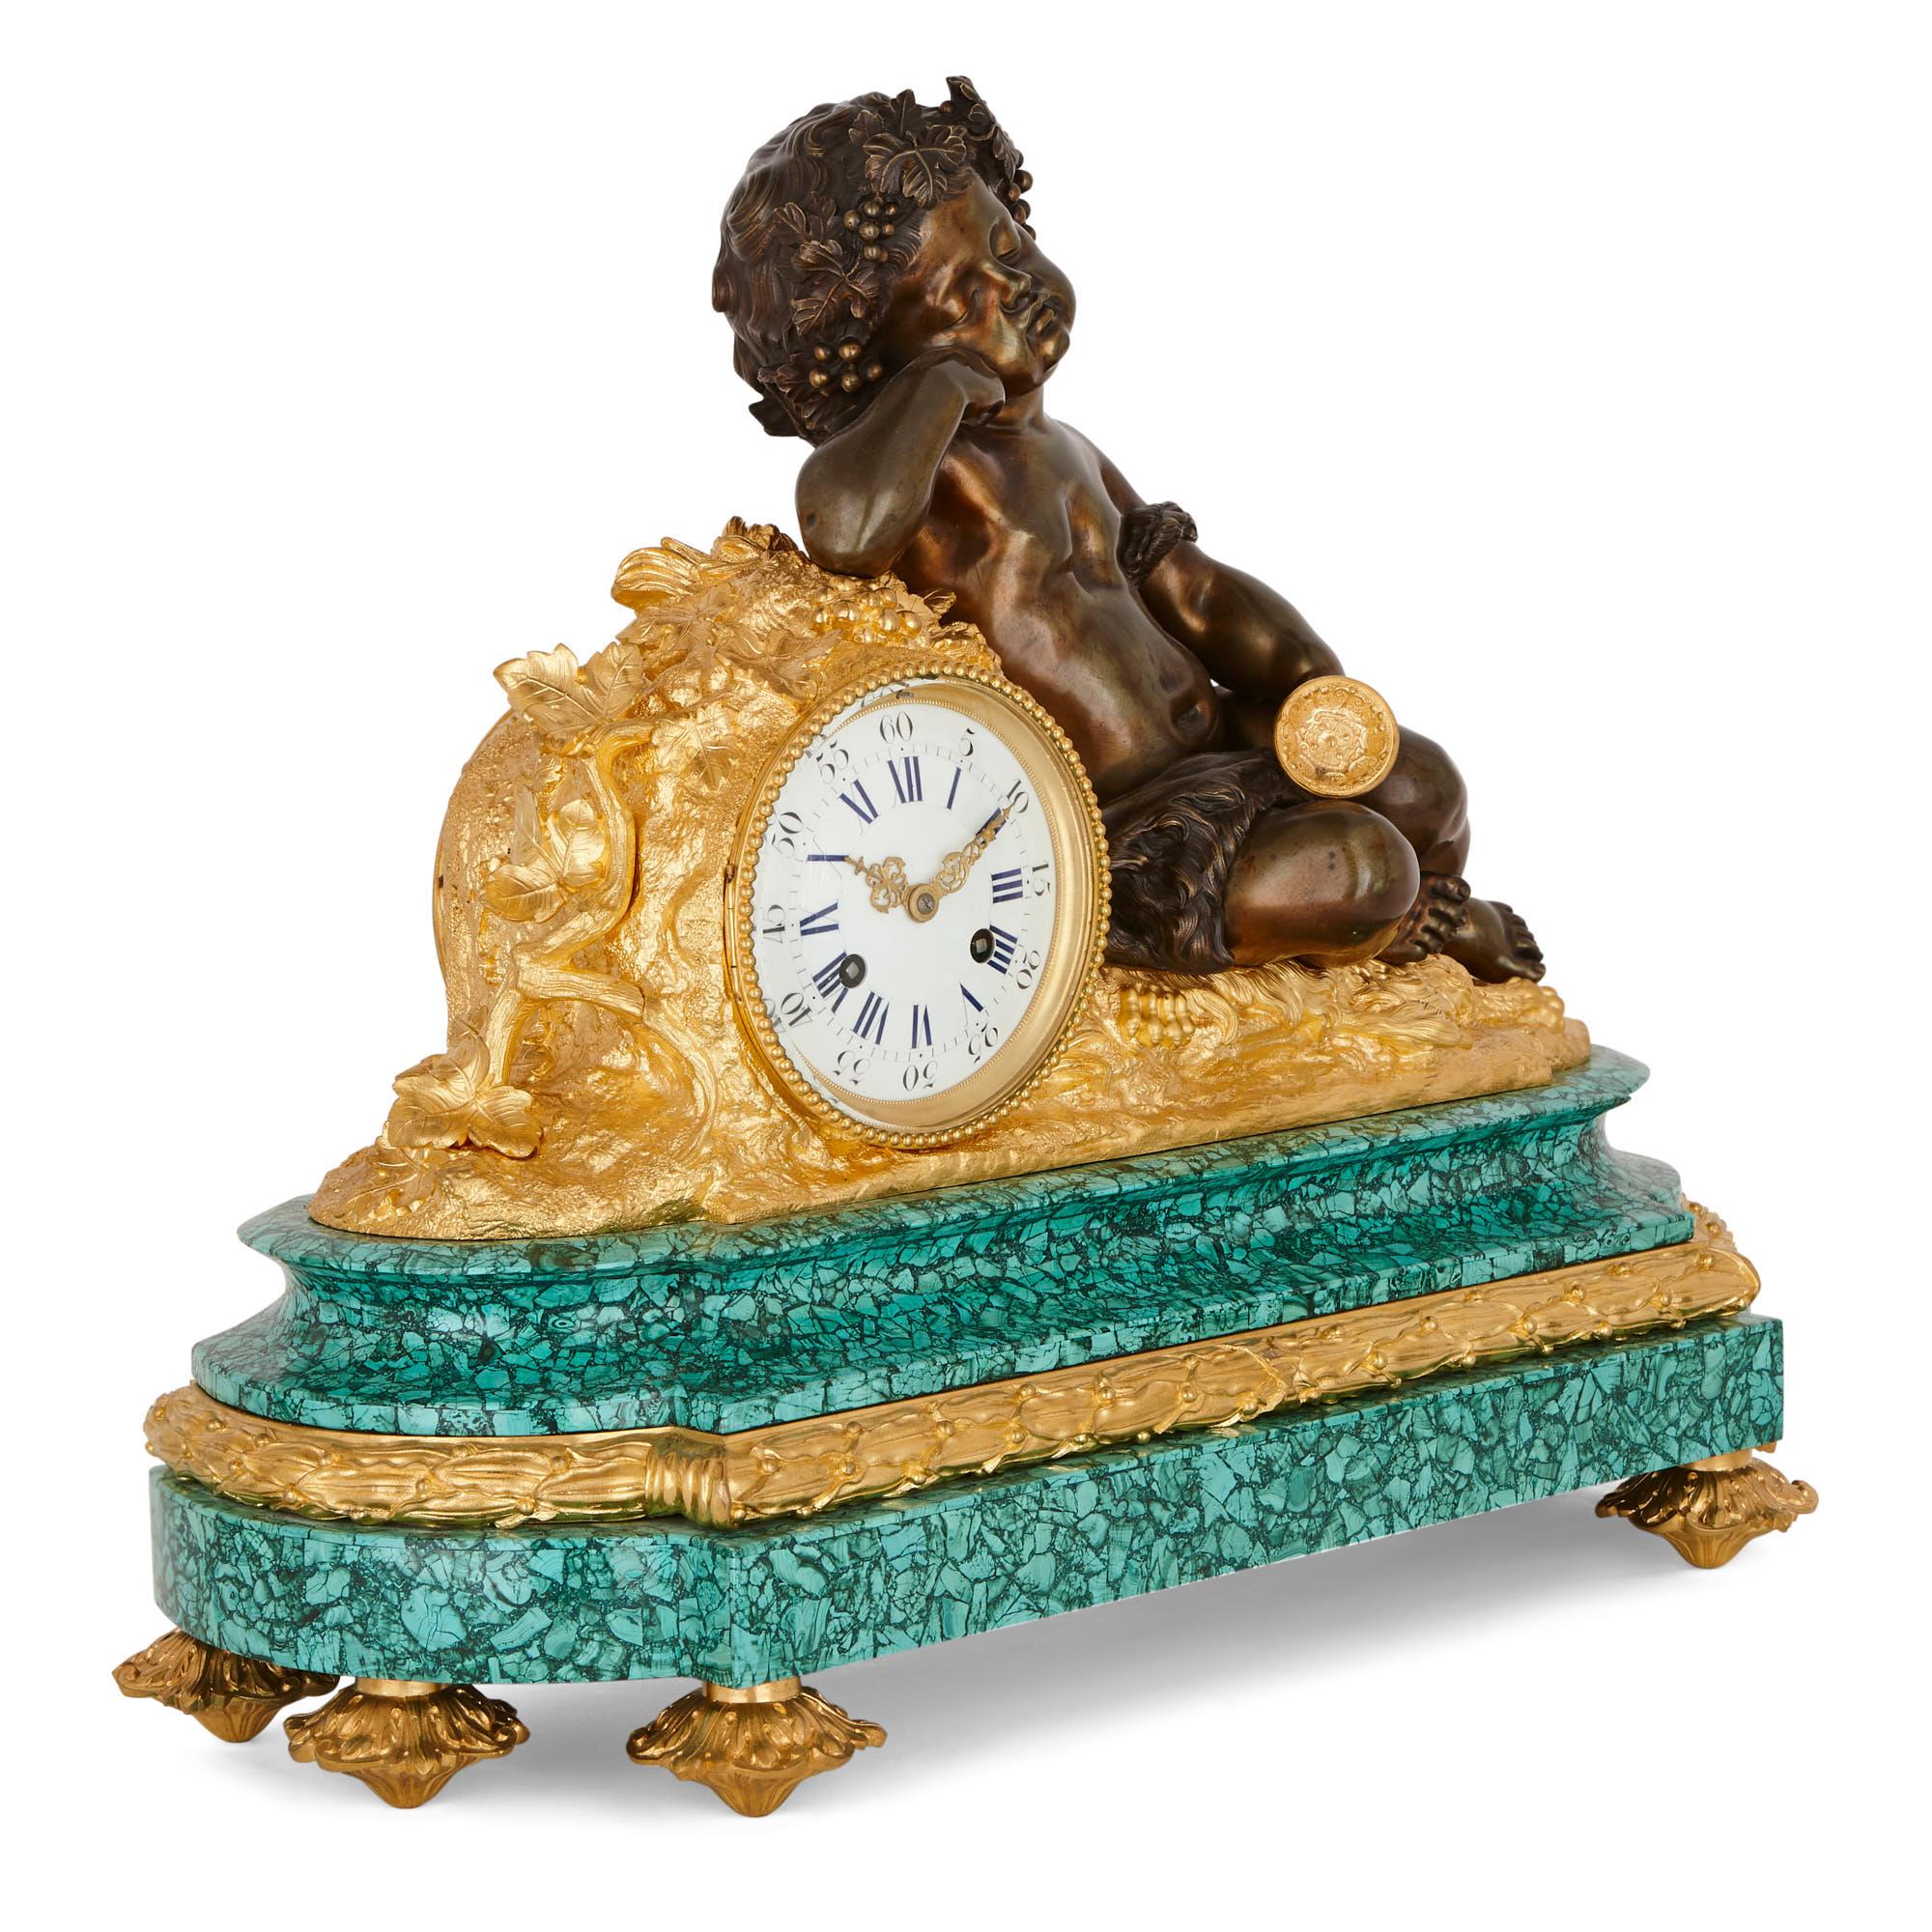 This three-piece clock and candelabra set is formed of malachite and is fitted with gilt and patinated bronze mounts. The malachite base of the clock stands on gilt bronze bun feet. The base supports the gilt bronze clock drum, which is mounted to